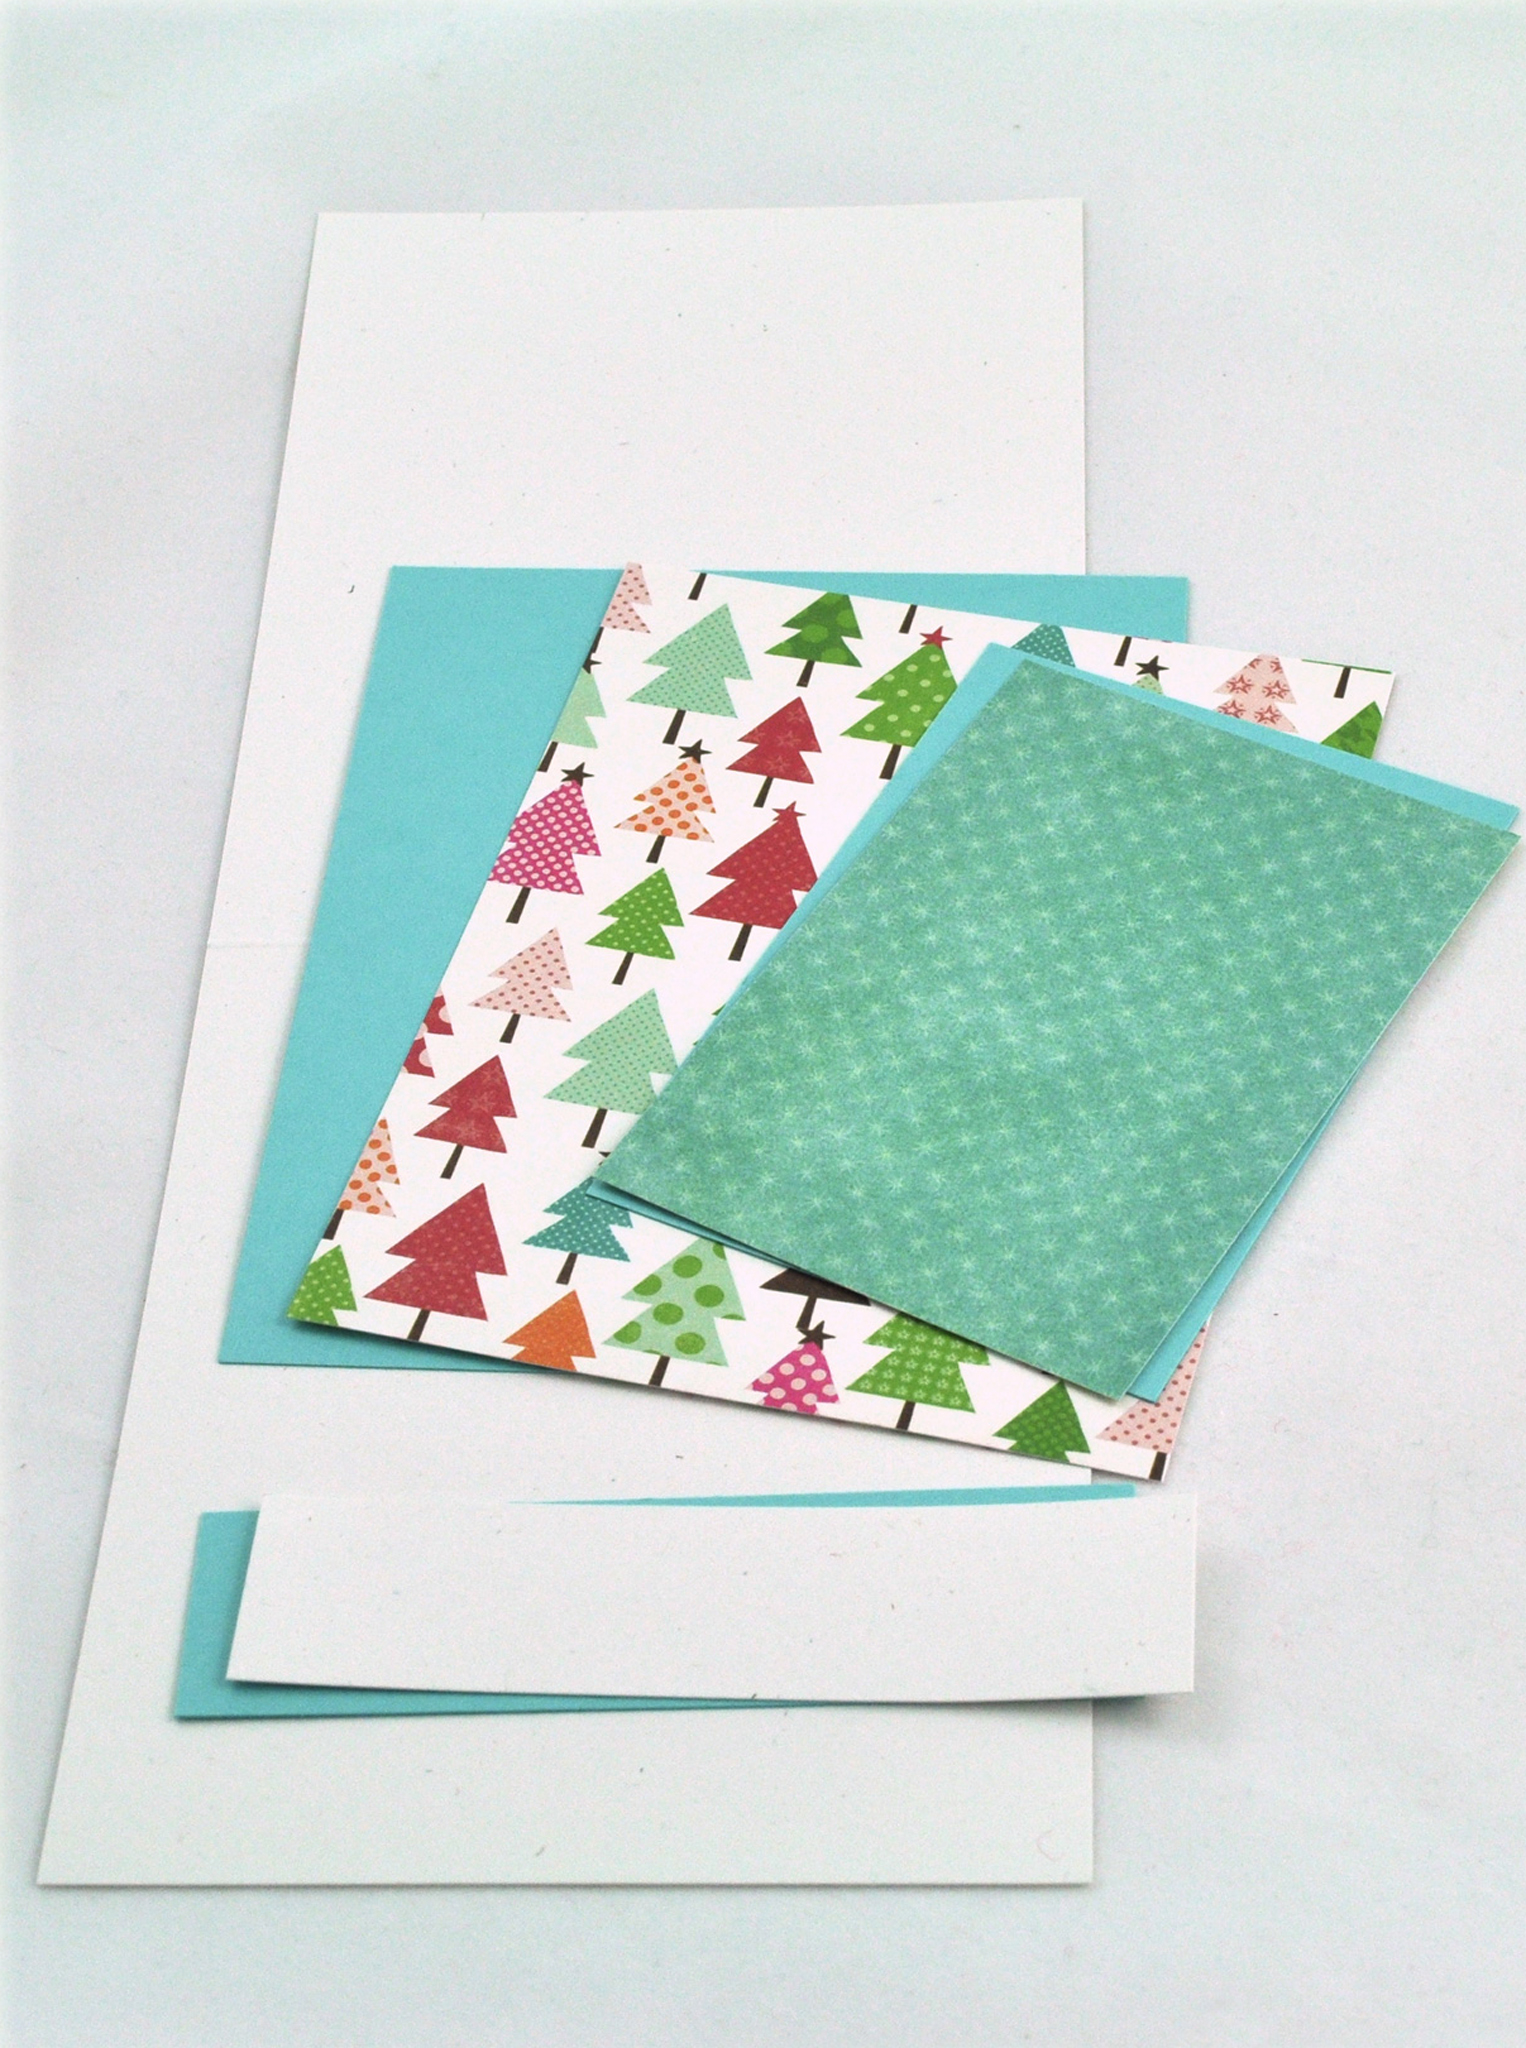 Details about   Hedgehogs DIY Greeting Card Toppers Craft Decorations Christmas Postcard W 